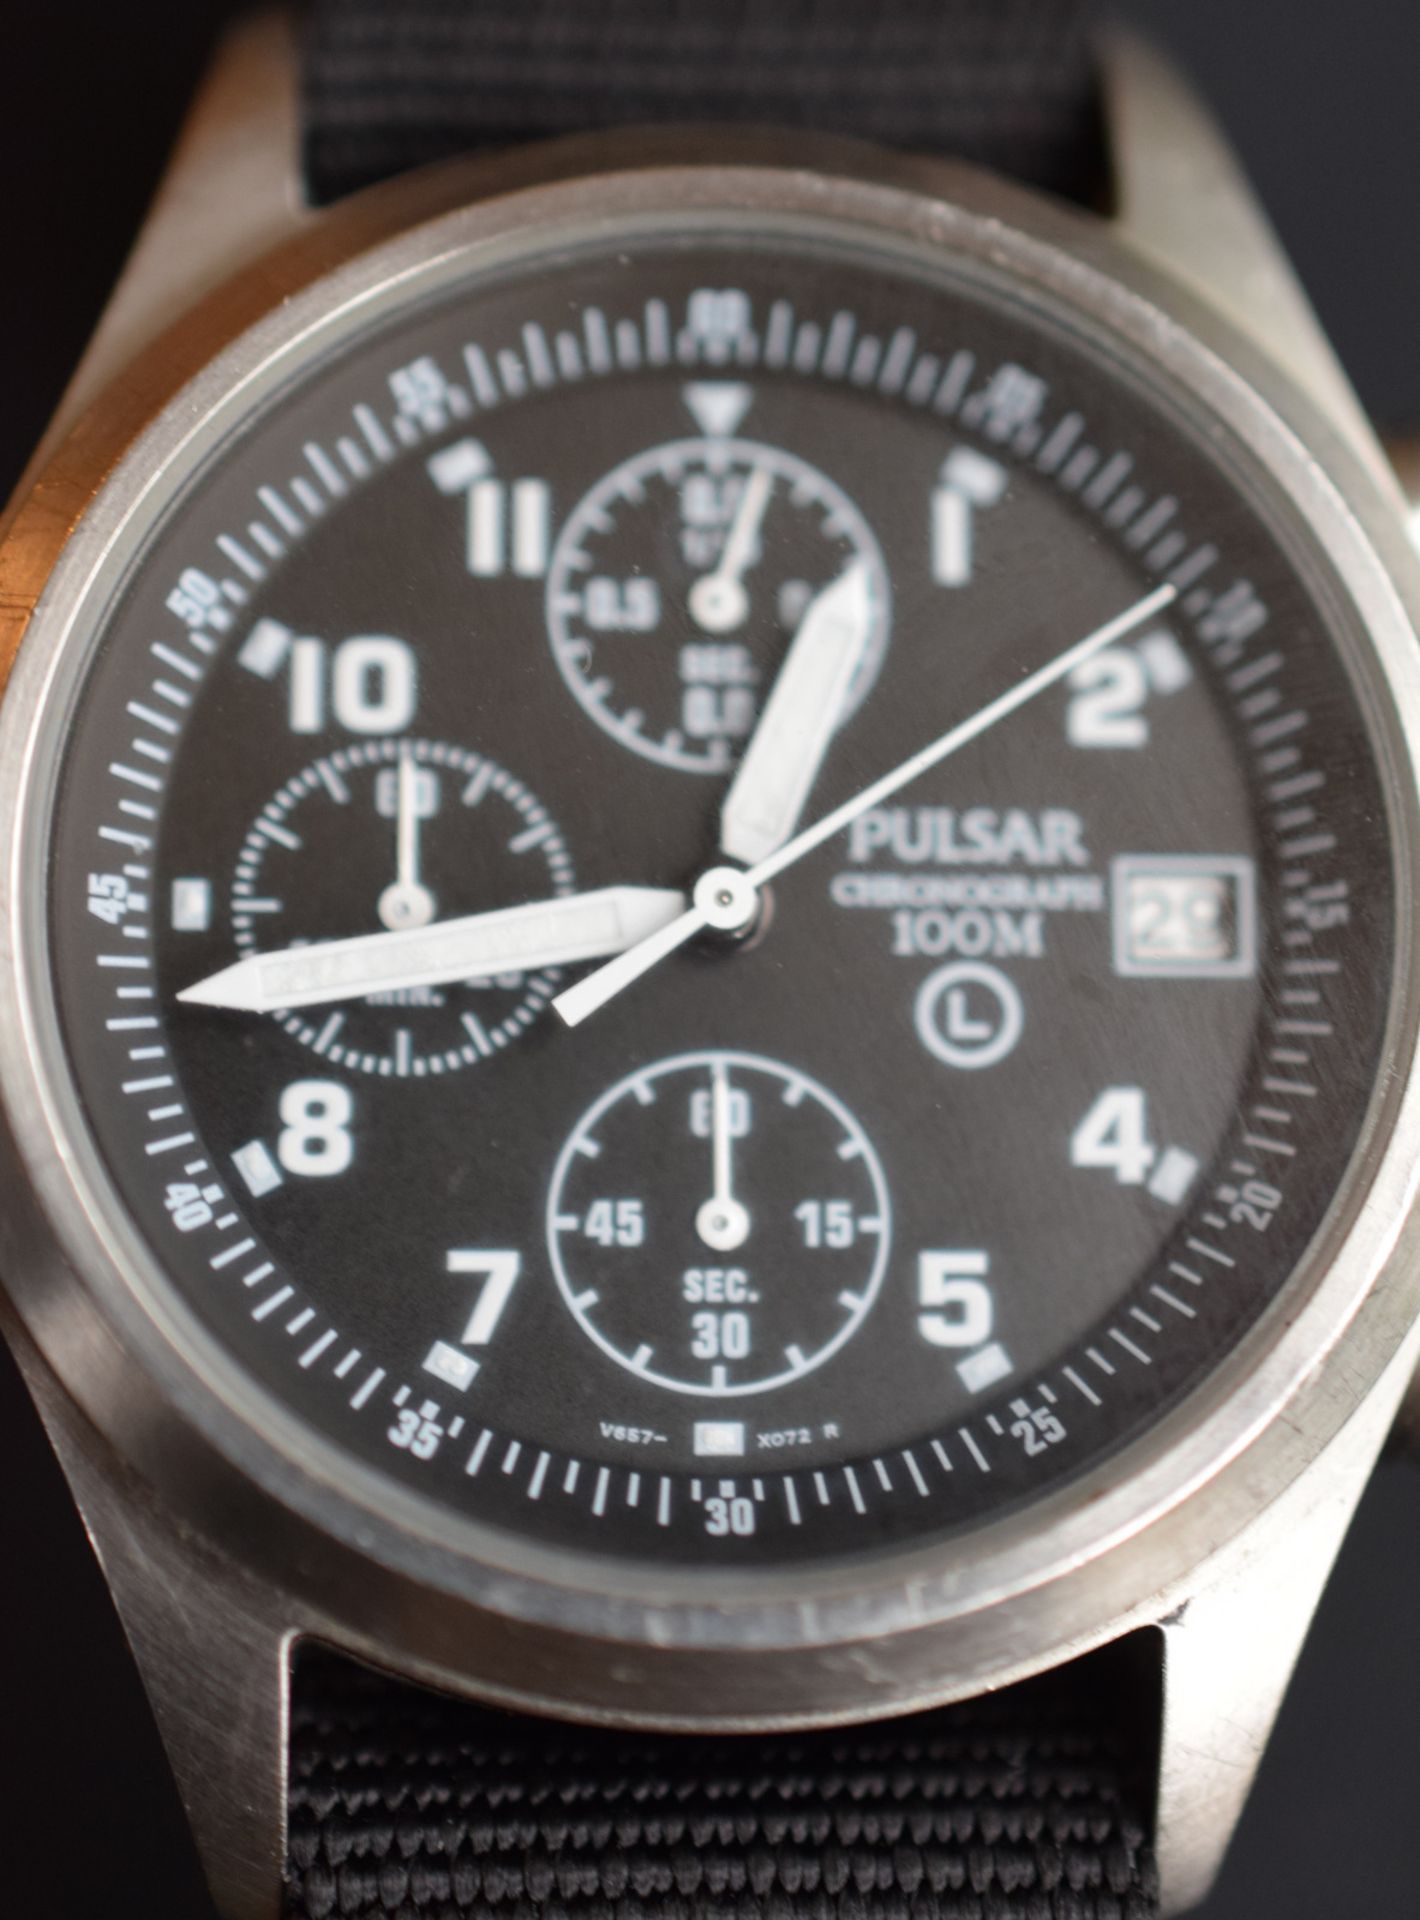 Excellent Military Pulsar Chronograph circa 2005 - Image 5 of 7